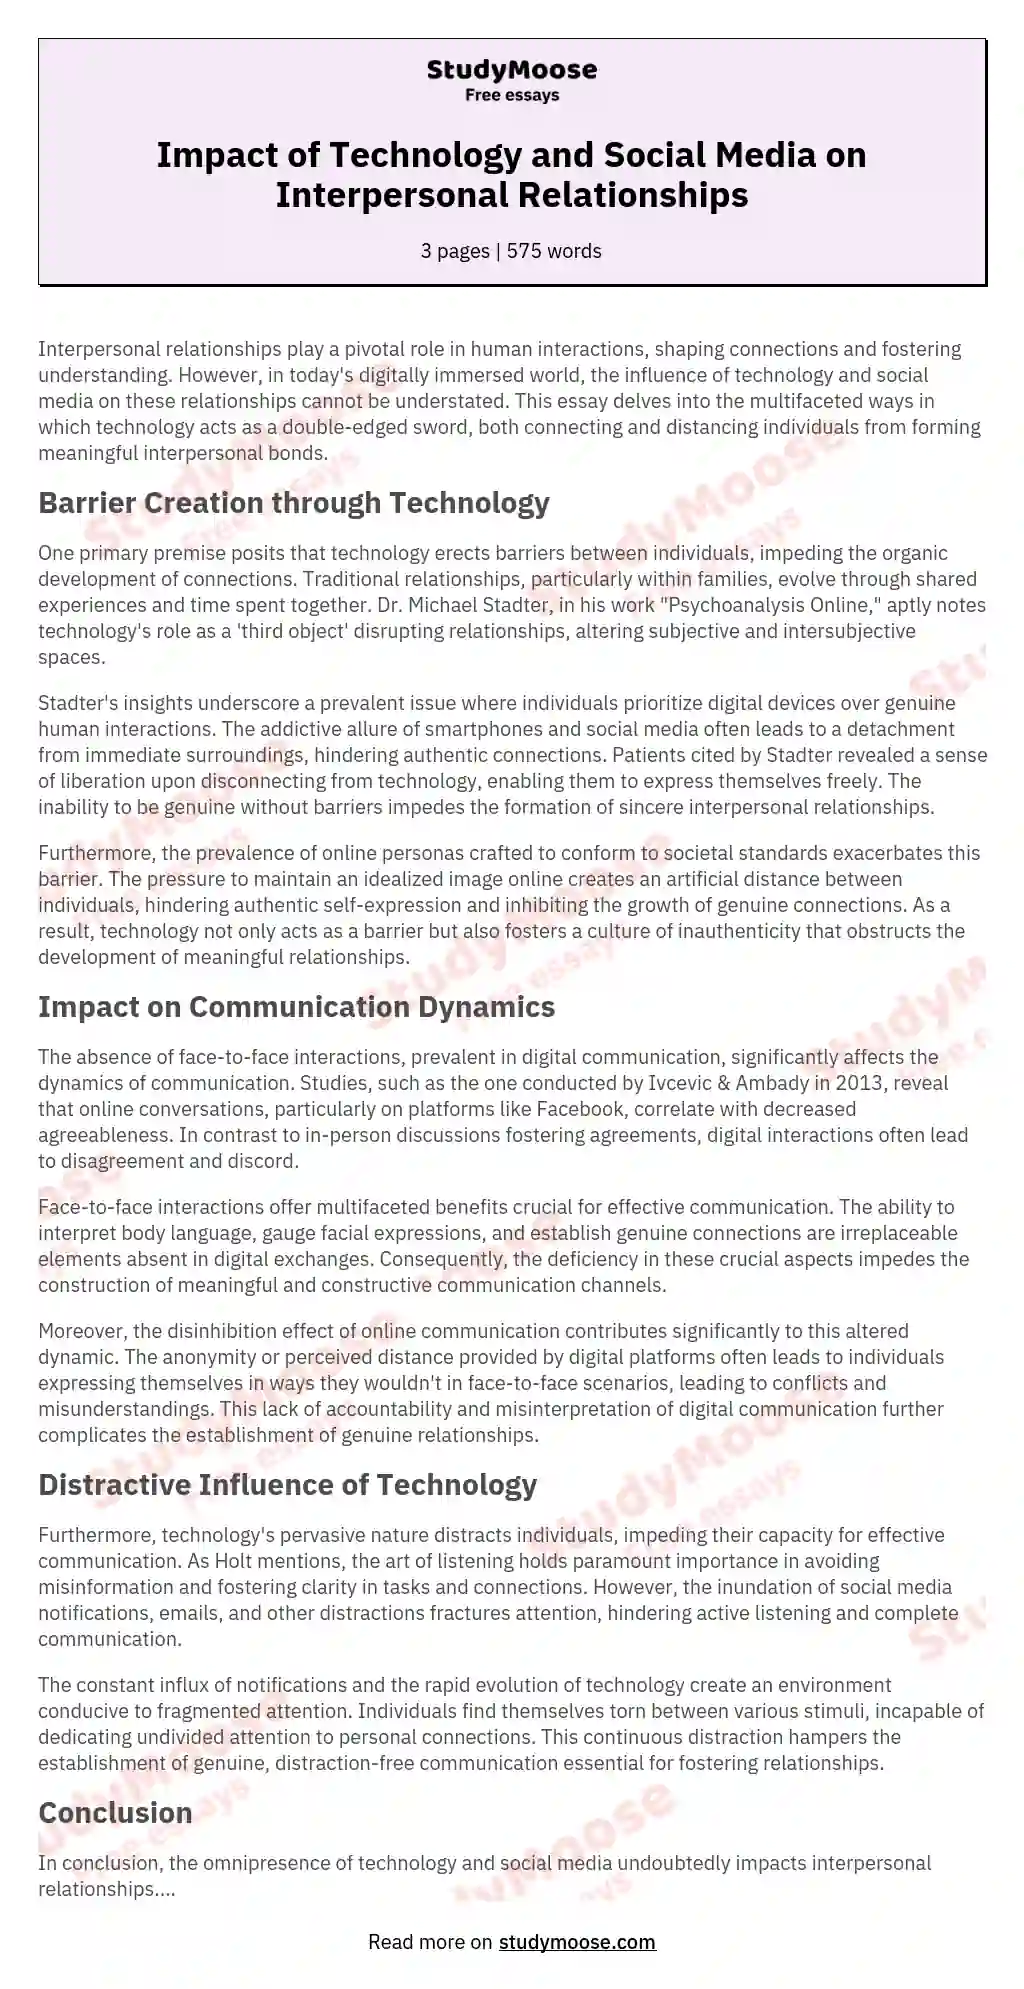 Impact of Technology and Social Media on Interpersonal Relationships essay